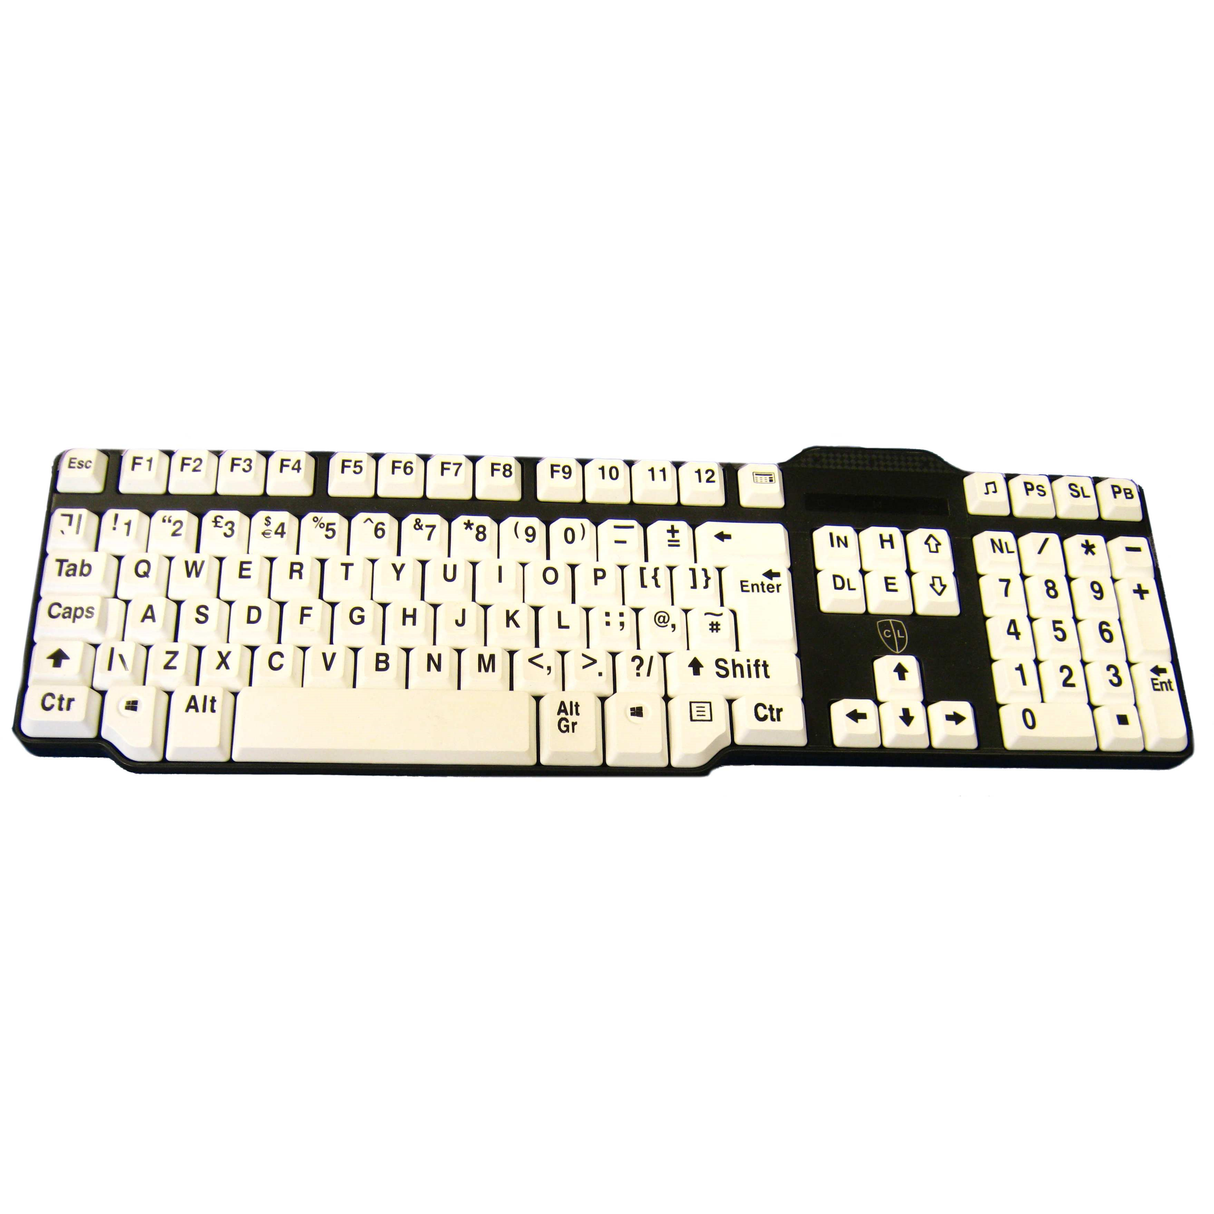 Easy2Use USB Keyboard with Braided Cable - Large Black Font on White Keys